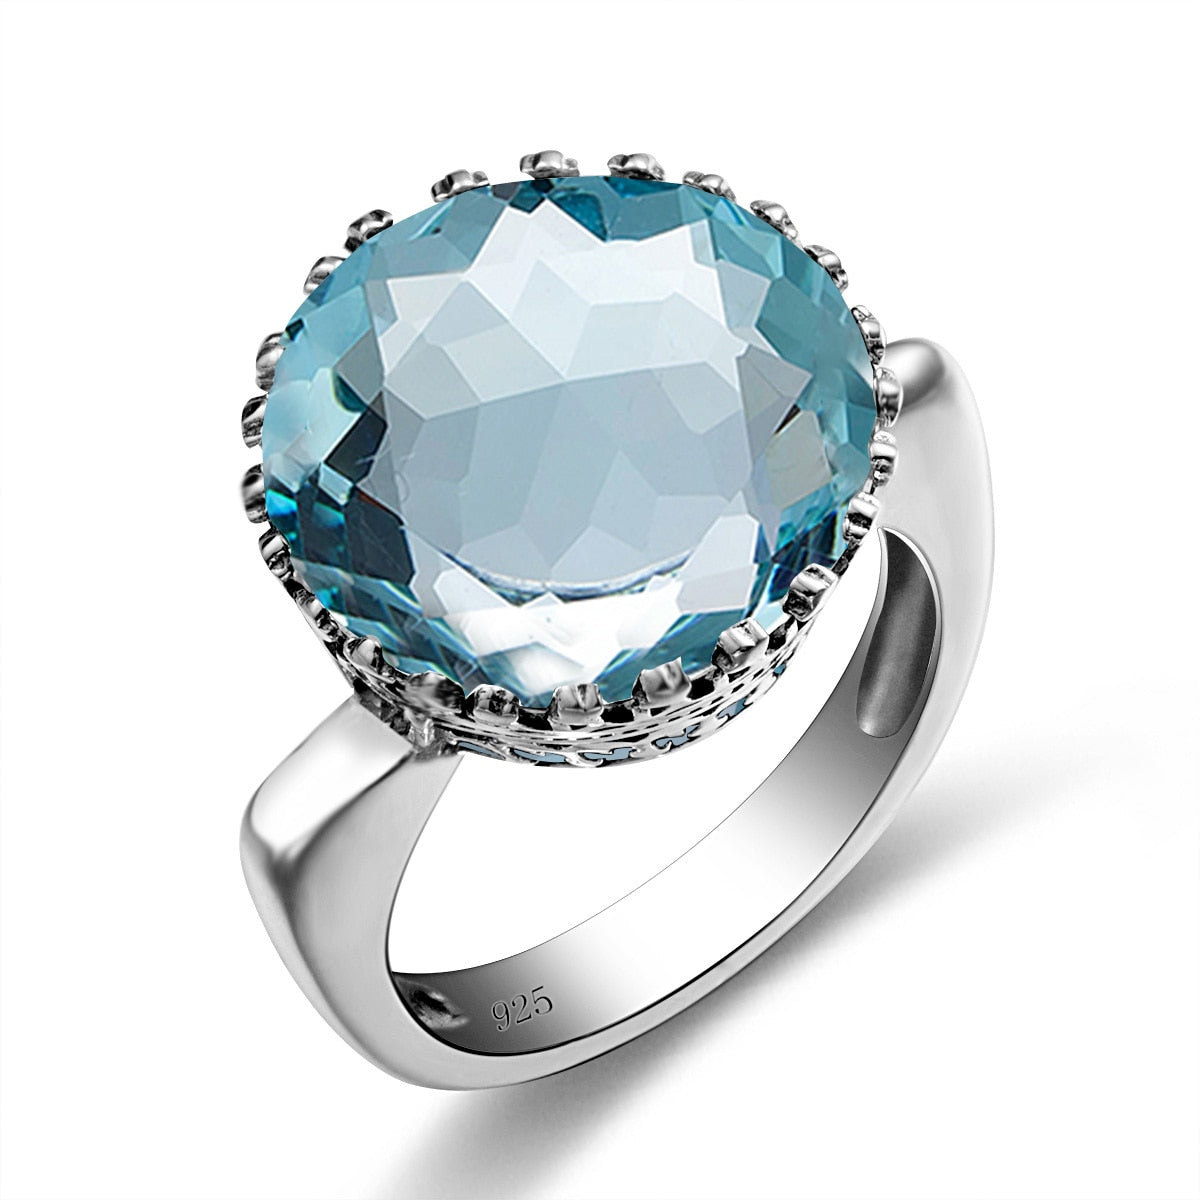 Szjinao Vintage 100% 925 Sterling Silver 15ct Round Created Aquamarine Ring For Women Famous Branded Handmade Fine Jewelery 2021 Aquamarine